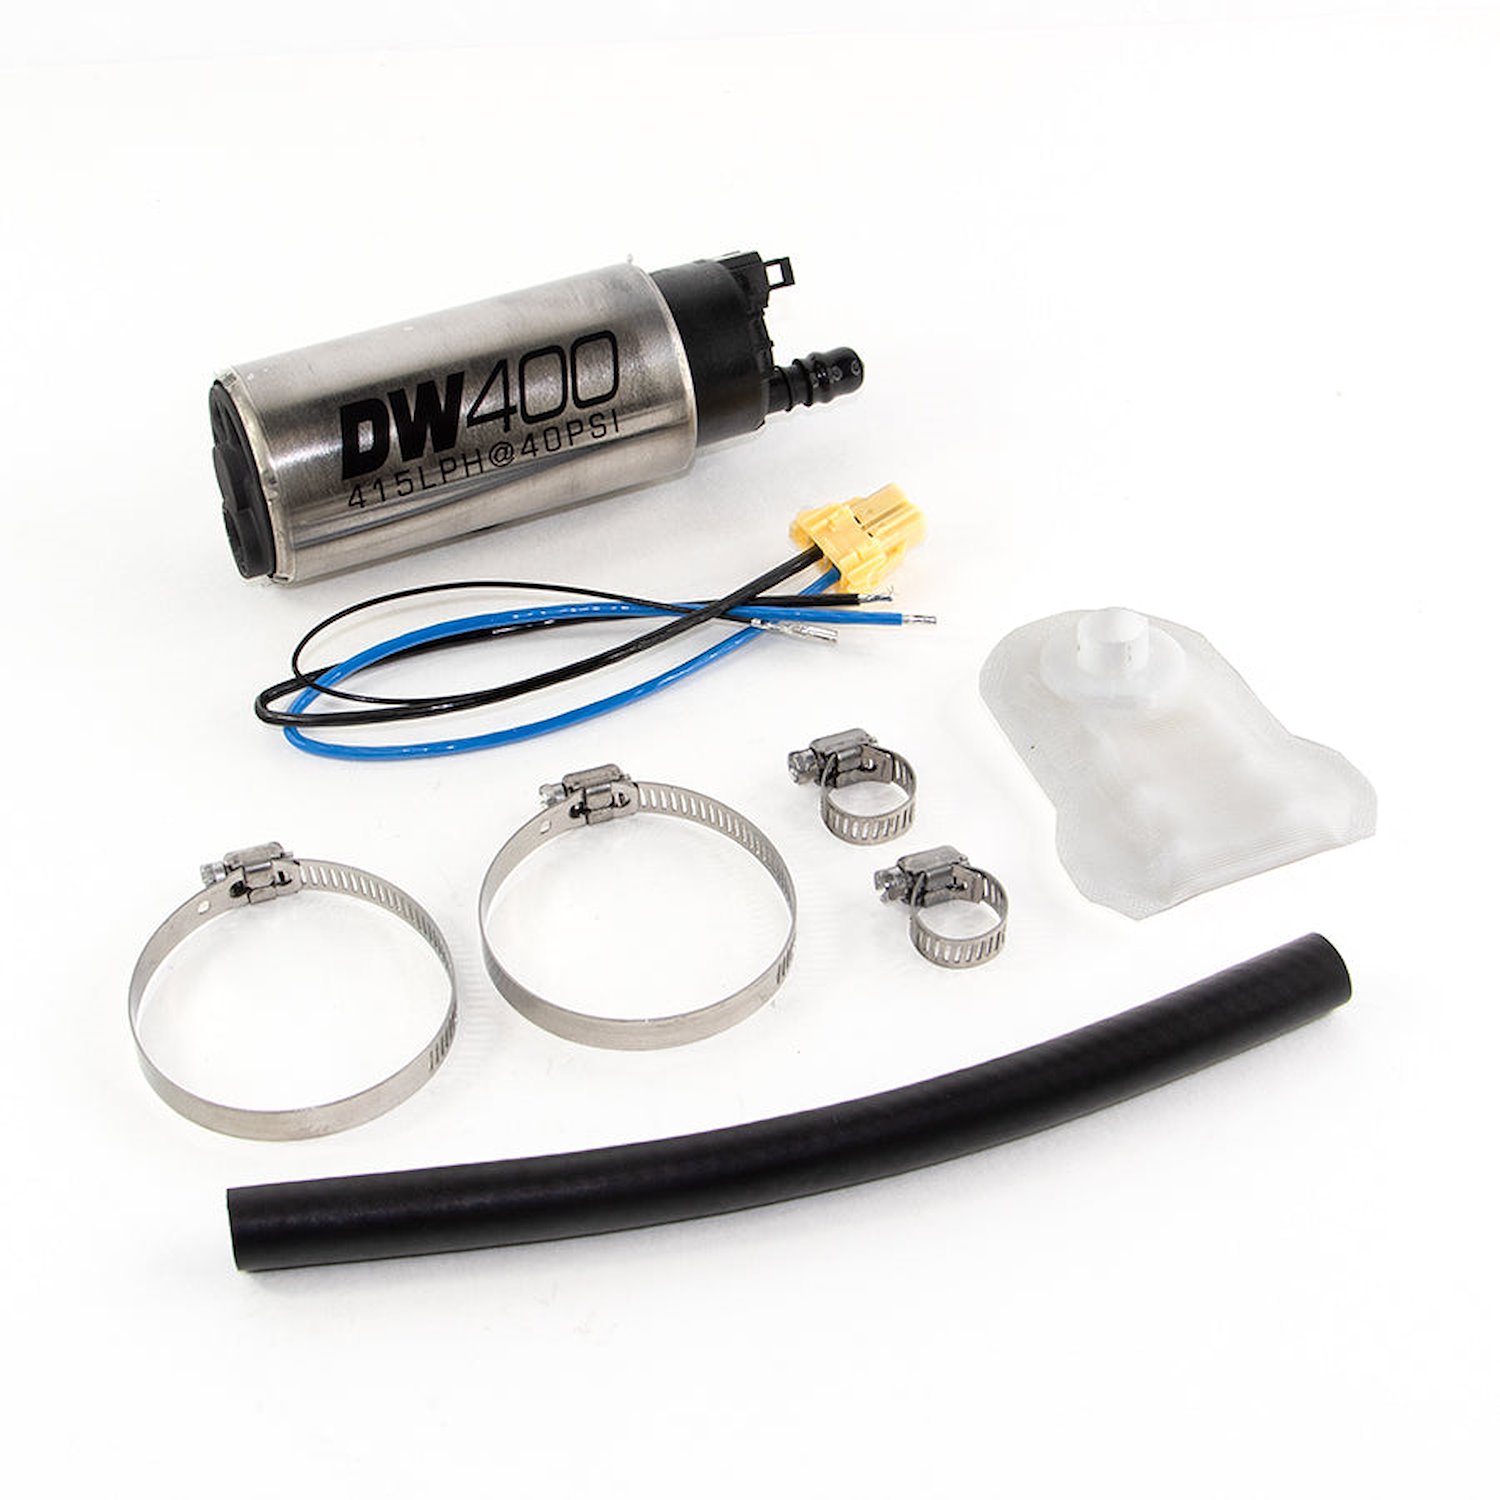 94011043 415lph in-tank fuel pump w/ install kit for Nissan 300ZX Z32 and 89-05 Nissan Skyline R32/R33/R34 GTR